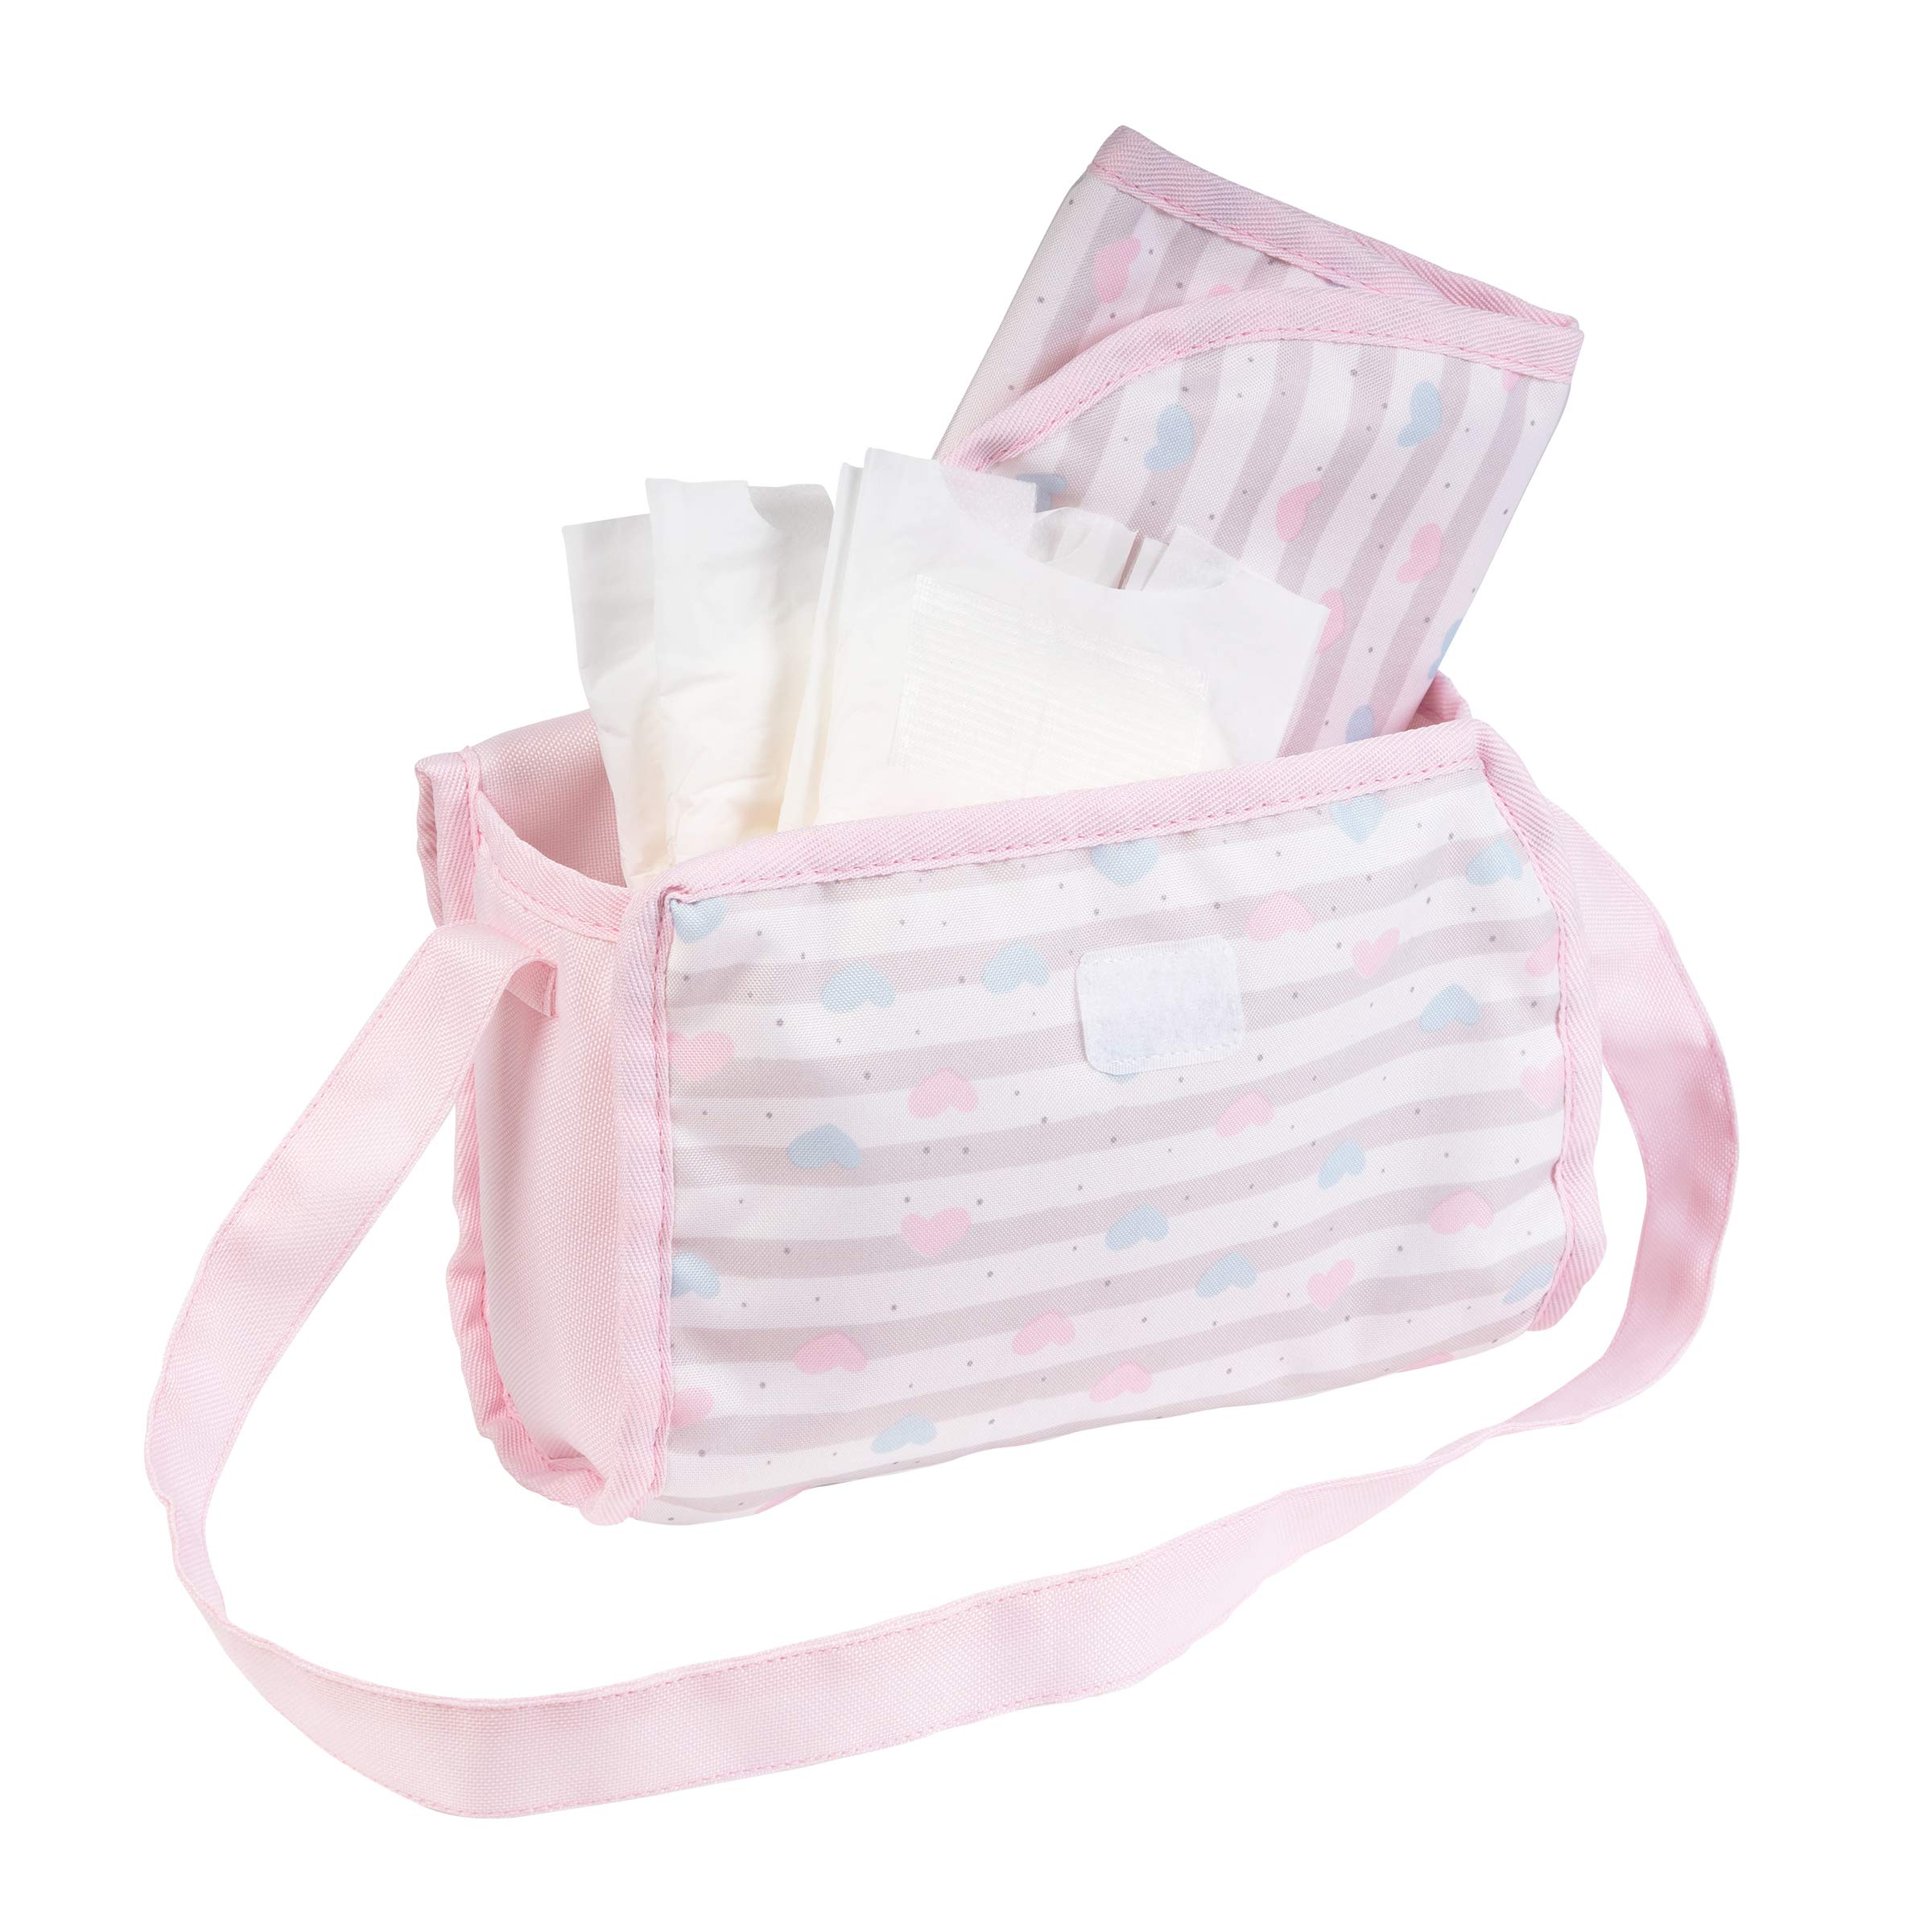 Adora Baby Doll Diaper Bag In Classic Pastel Pink, Diapers Fit 13 Inch Dolls